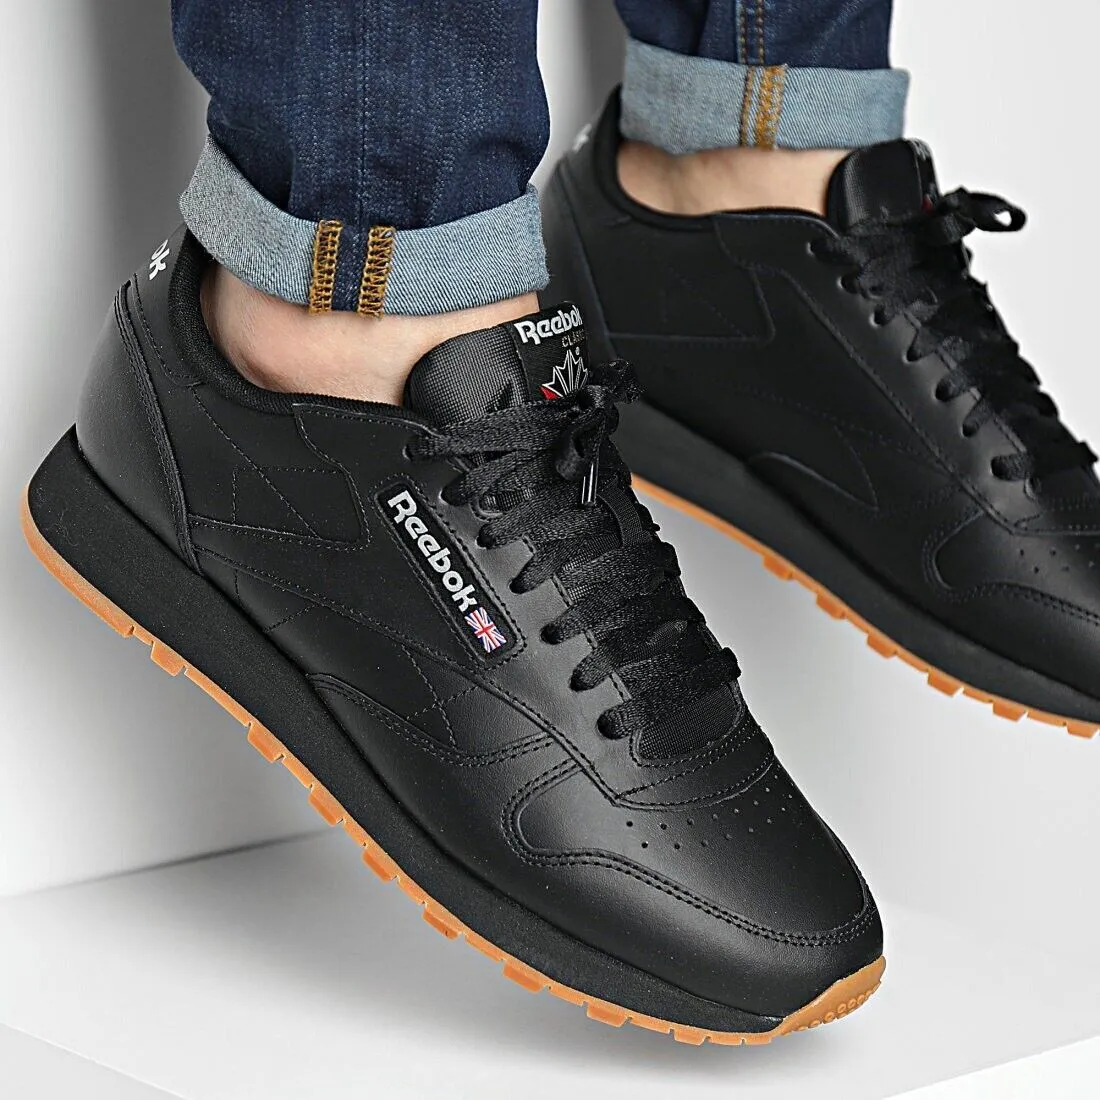 Black - eBay Classic Sizes | Reebok Leather Sneakers 13 Gum 8 Shoes